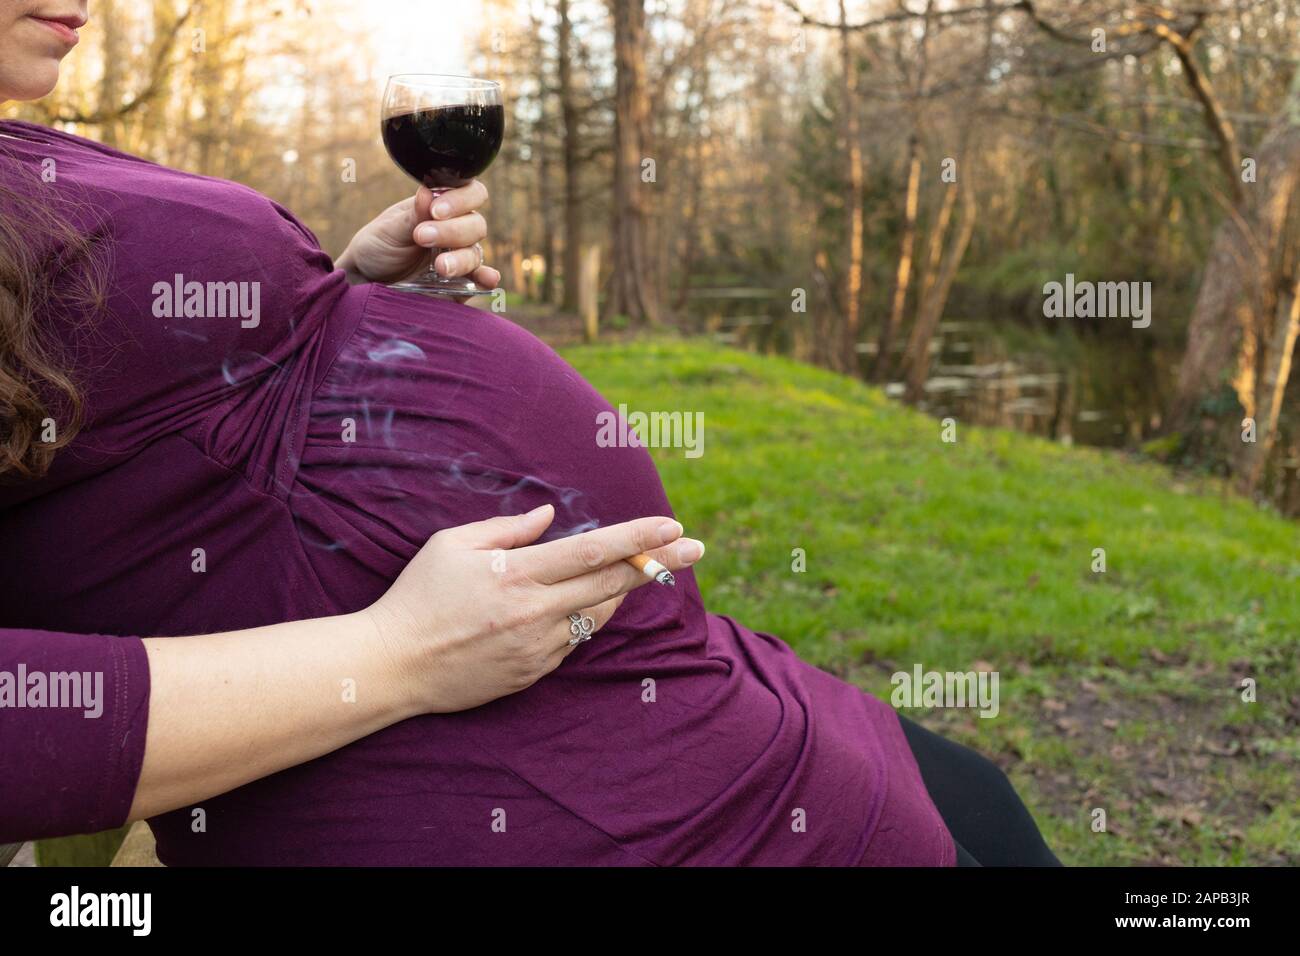 Pregnant woman sitting on a bench, drinking red wine and smoking cigarette in a park. Stock Photo